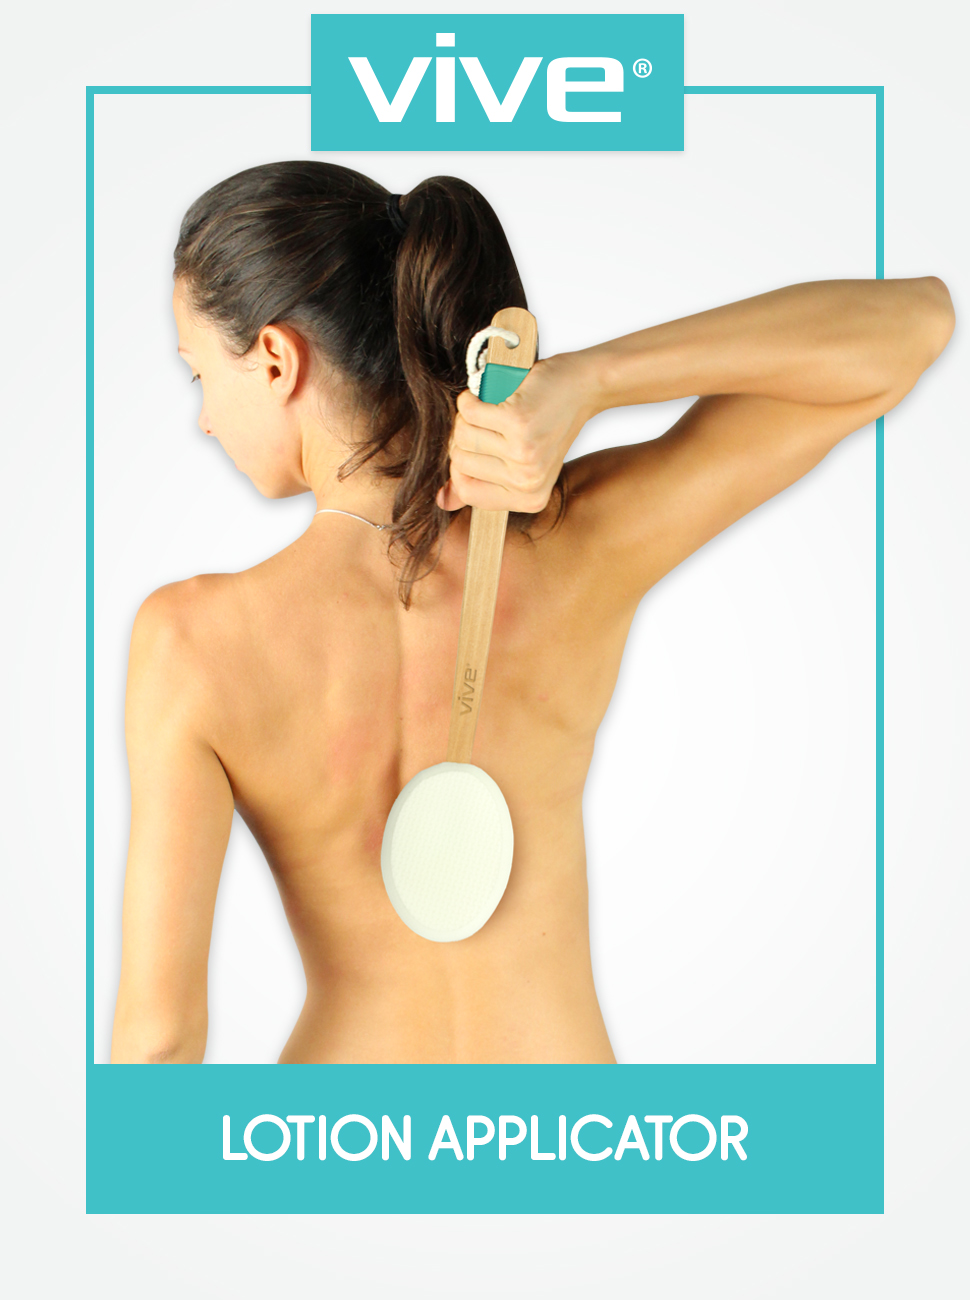 Lotion Applicator for Your Back (4 Pads) - Long Reach Handle with Sponge for Easy Self Application o